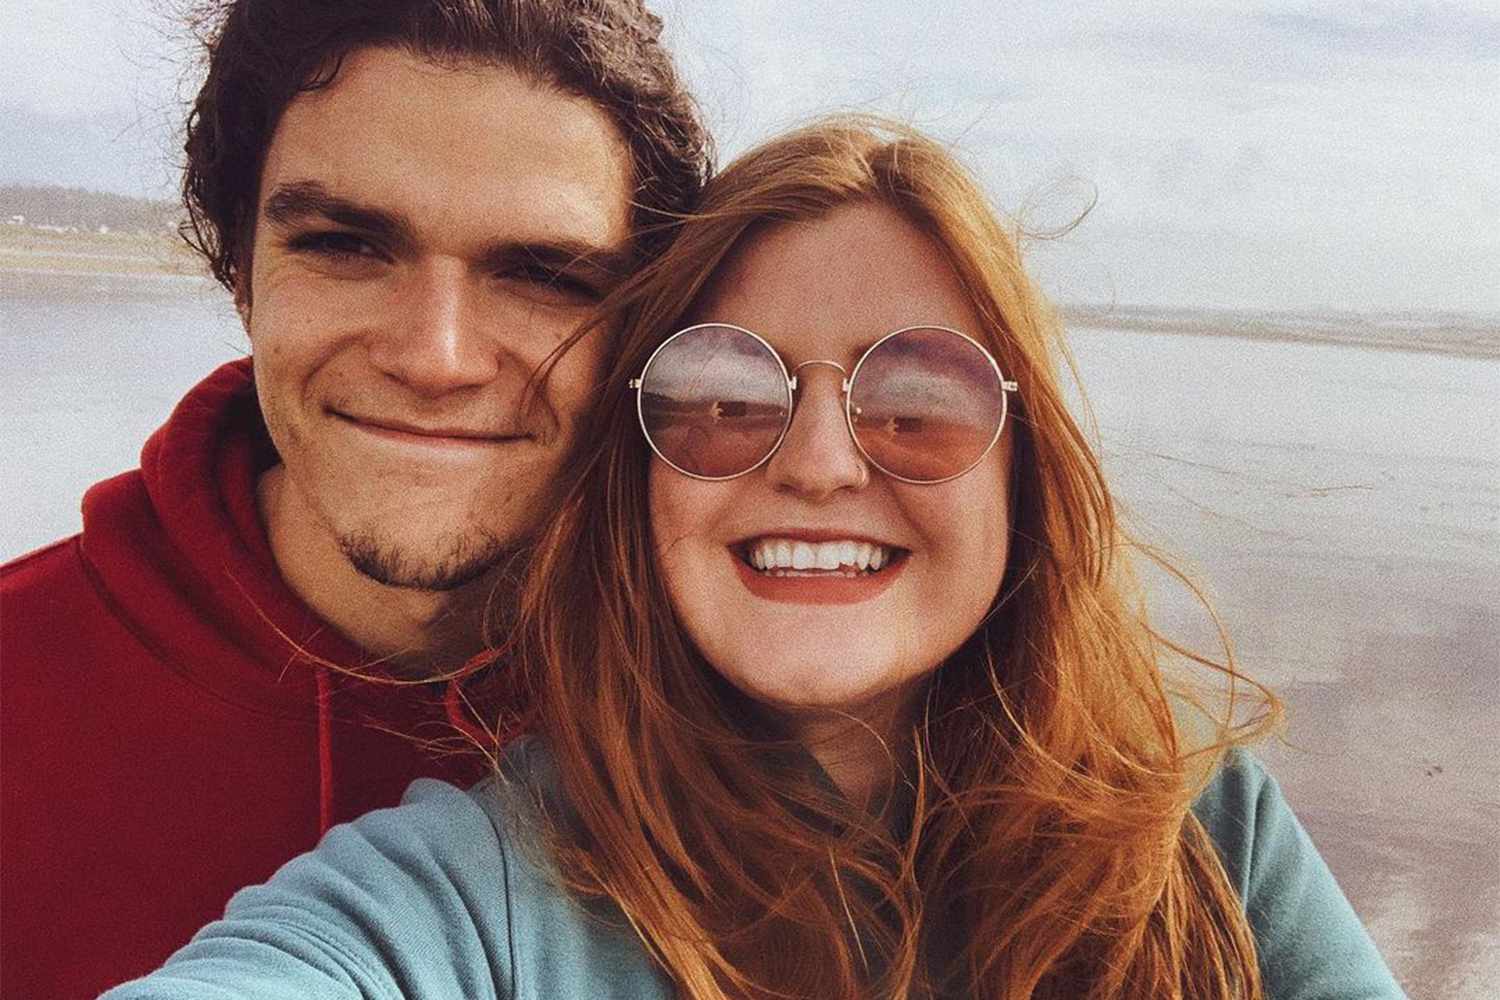 jacob roloff and isabel rock